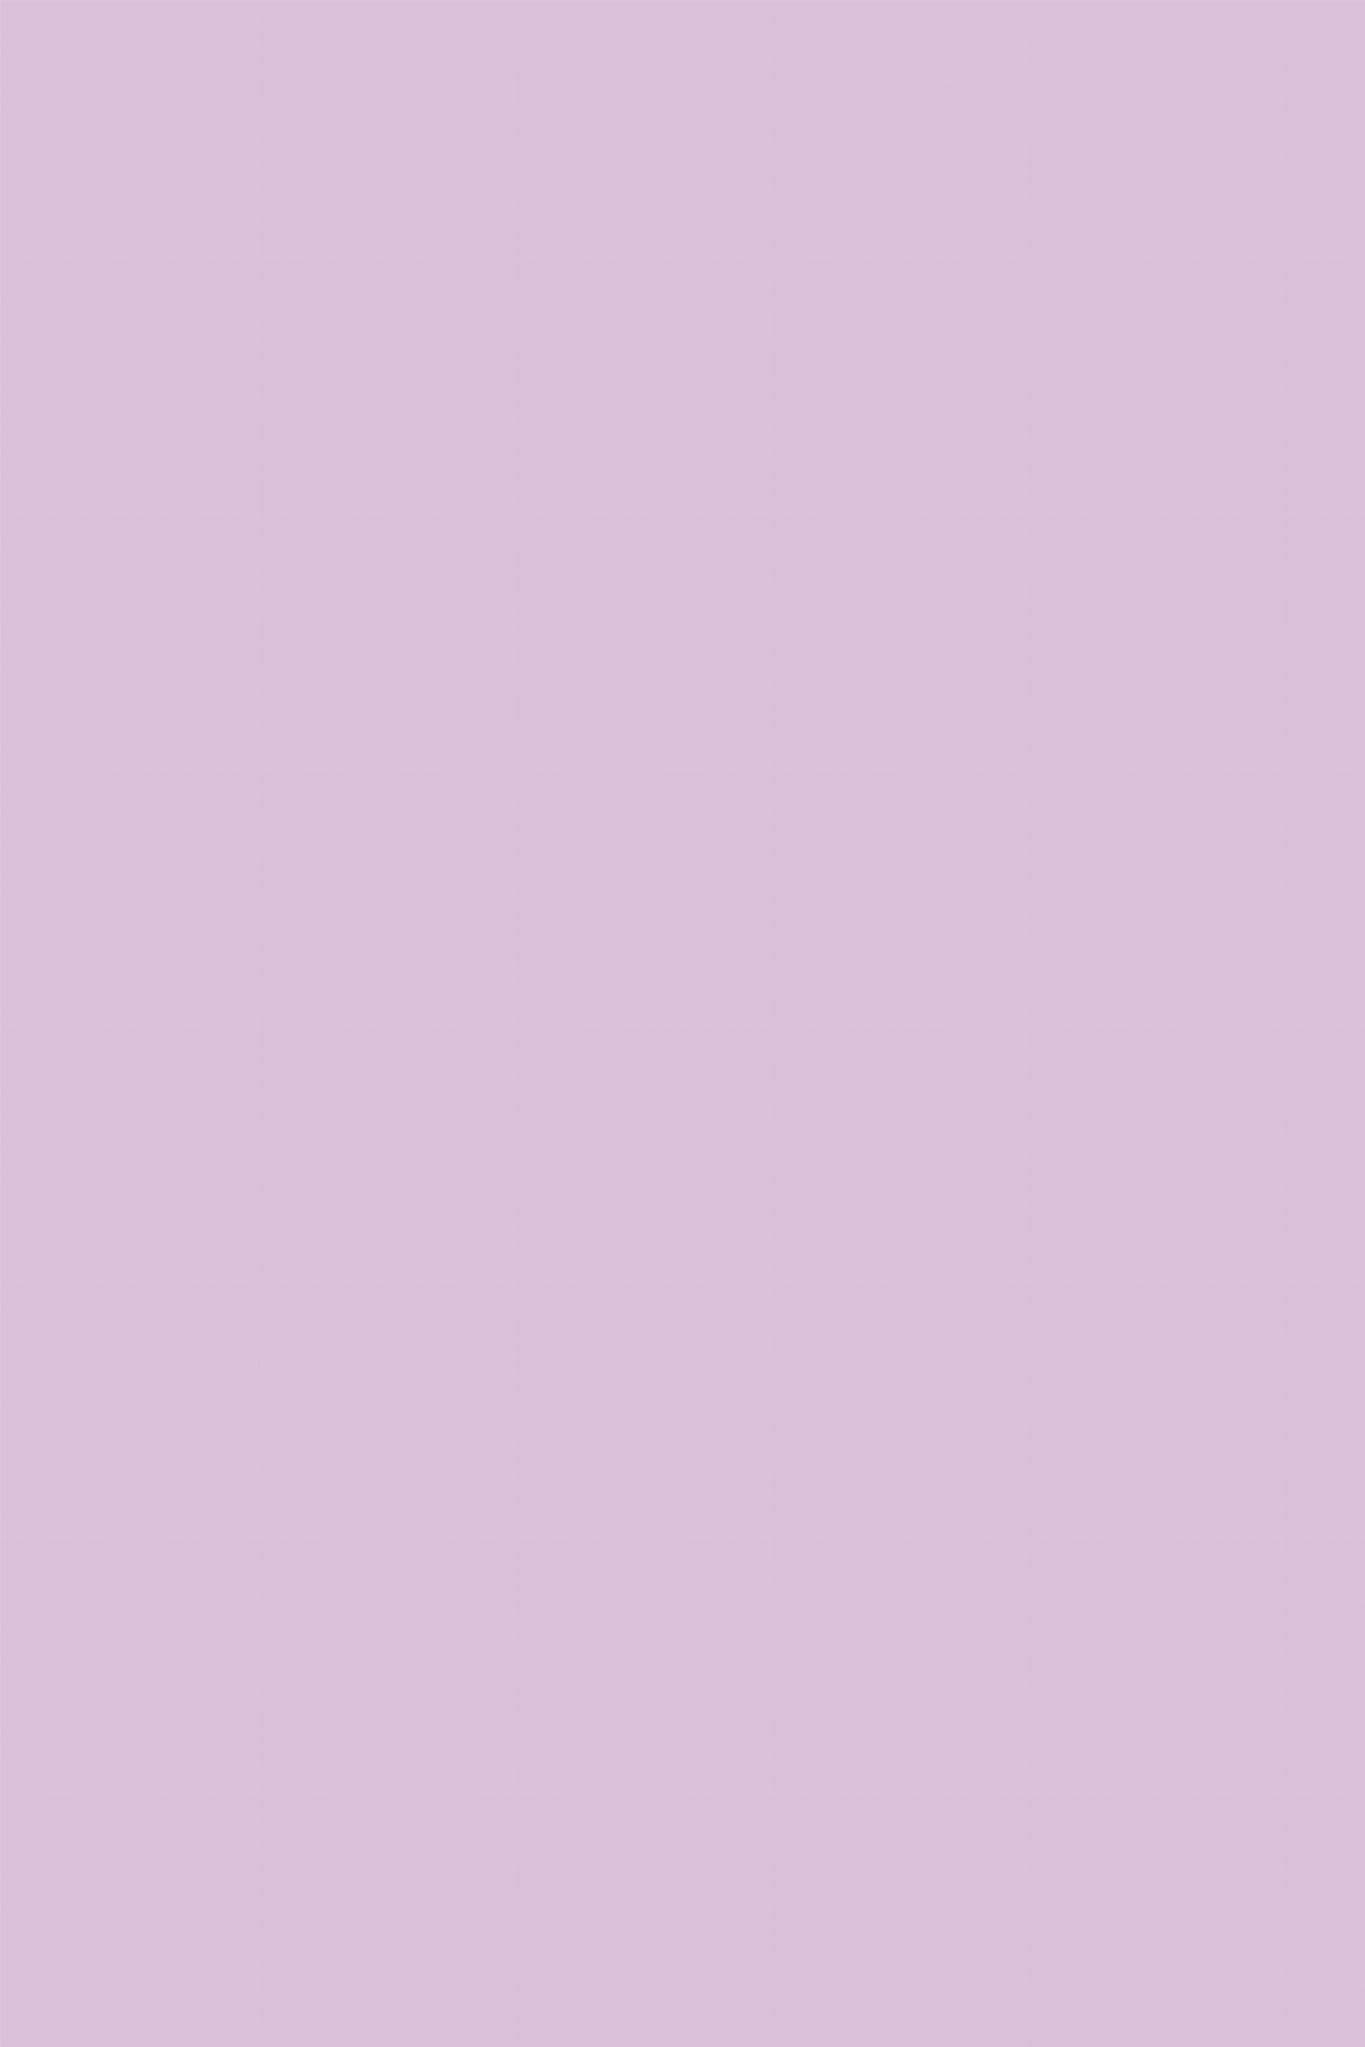 Pastel Aesthetic Lilac Solid Color Wallpaper Peel And Stick Or